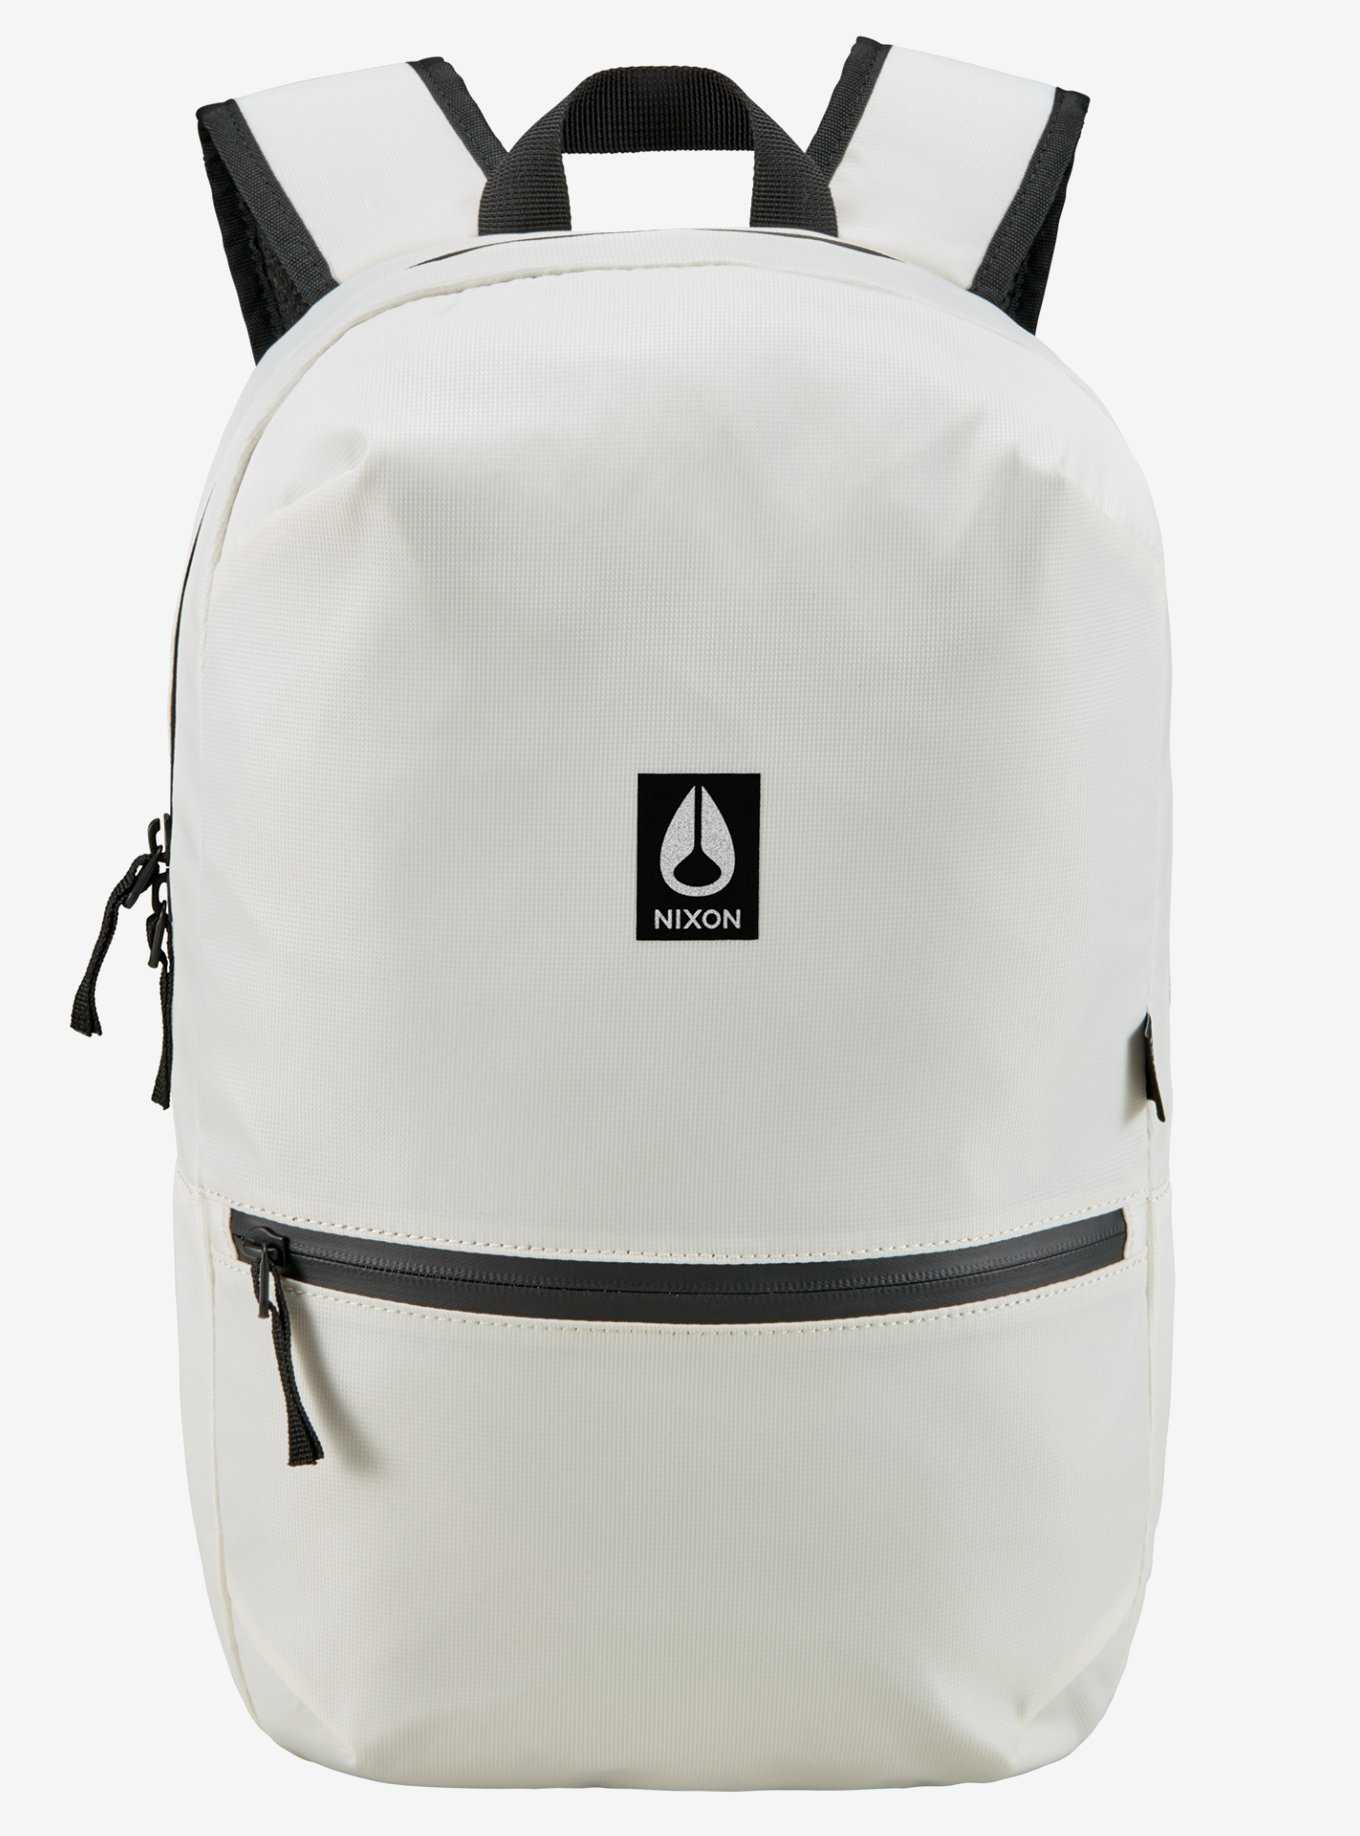 Nixon Day Trippin' Backpack White, , hi-res